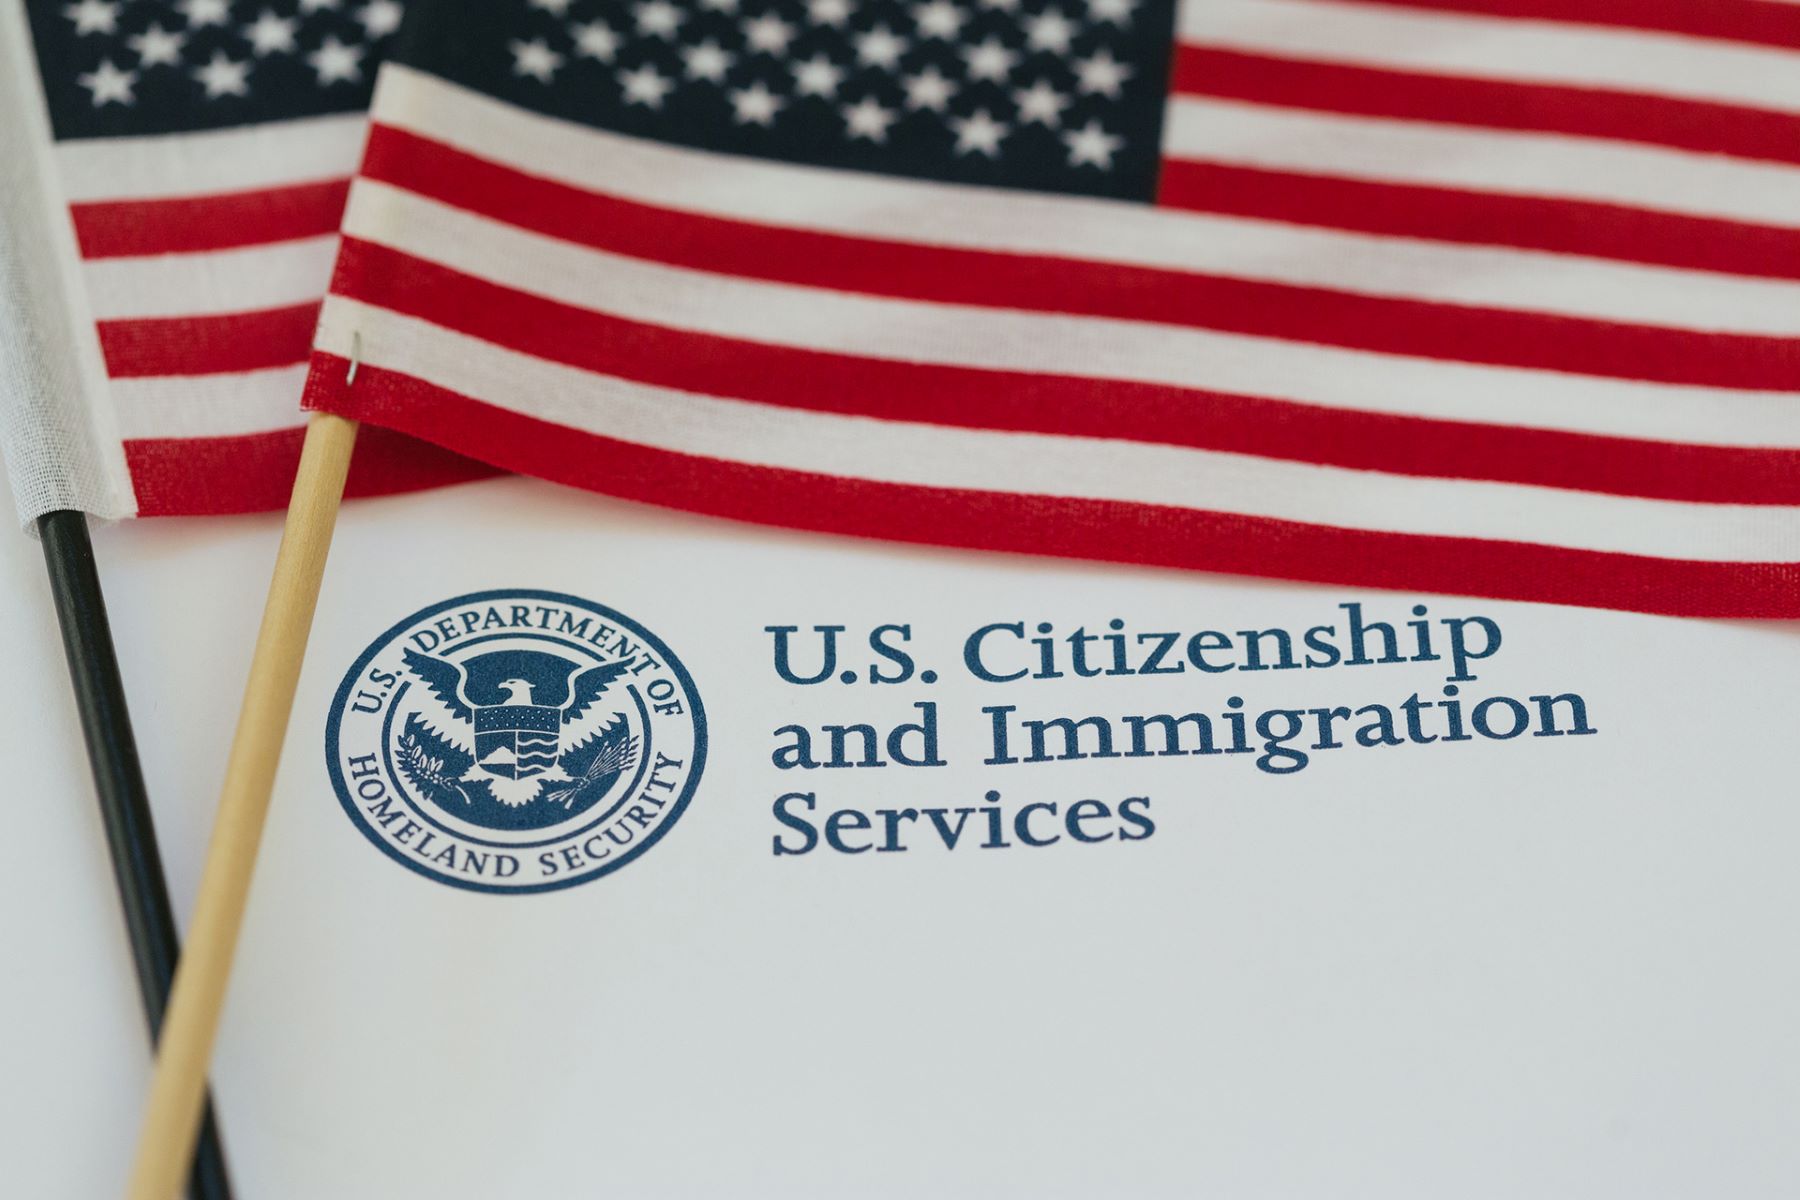 USCIS Has Been Reviewing My Case Since February 2022 - What's Taking So Long?